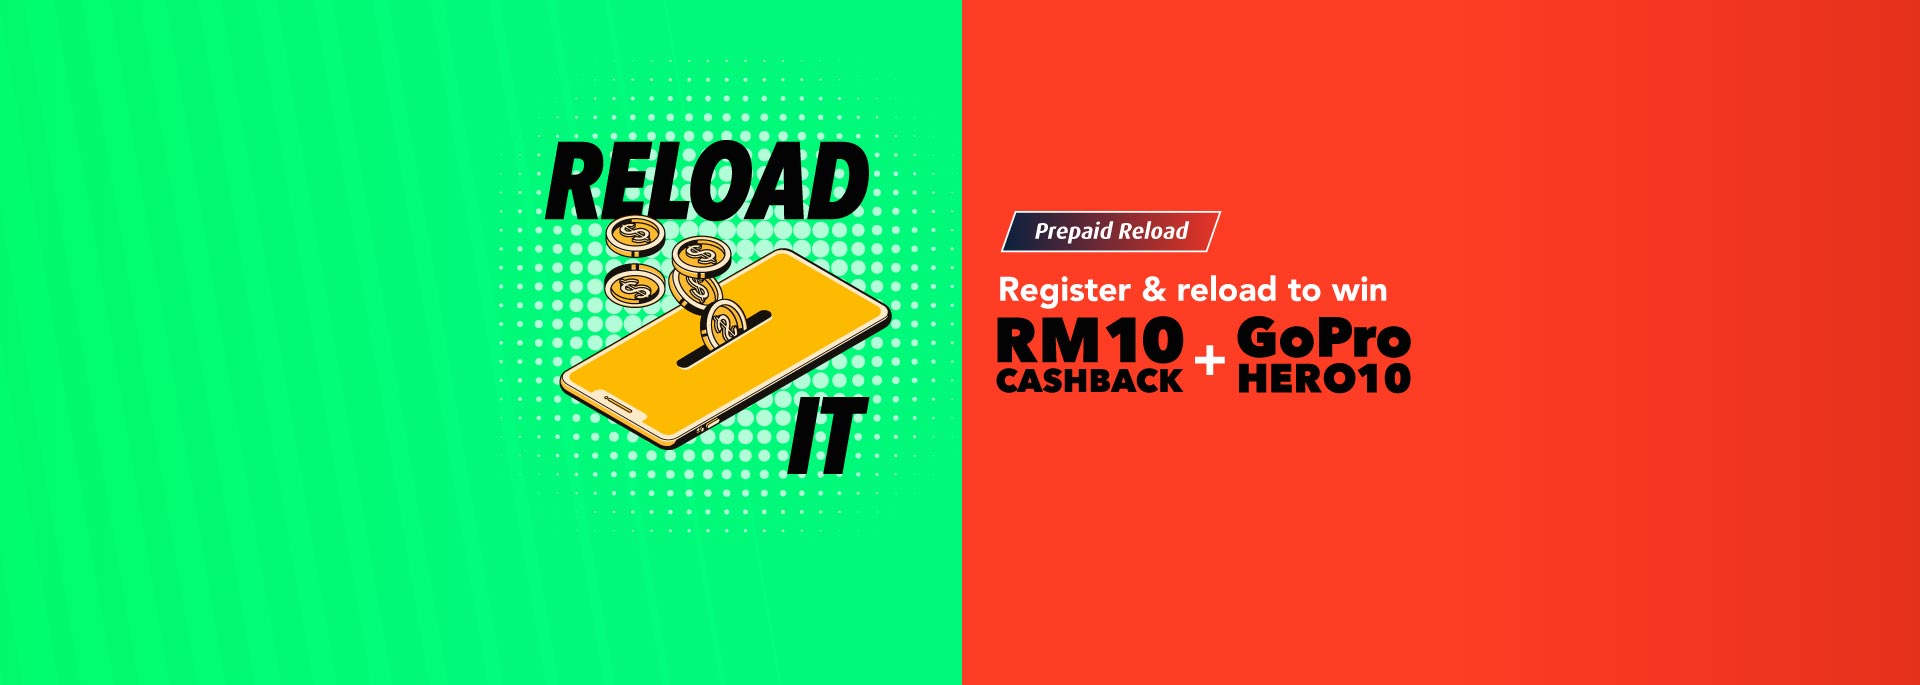 Register for HLB Connect & reload your mobile prepaid to win